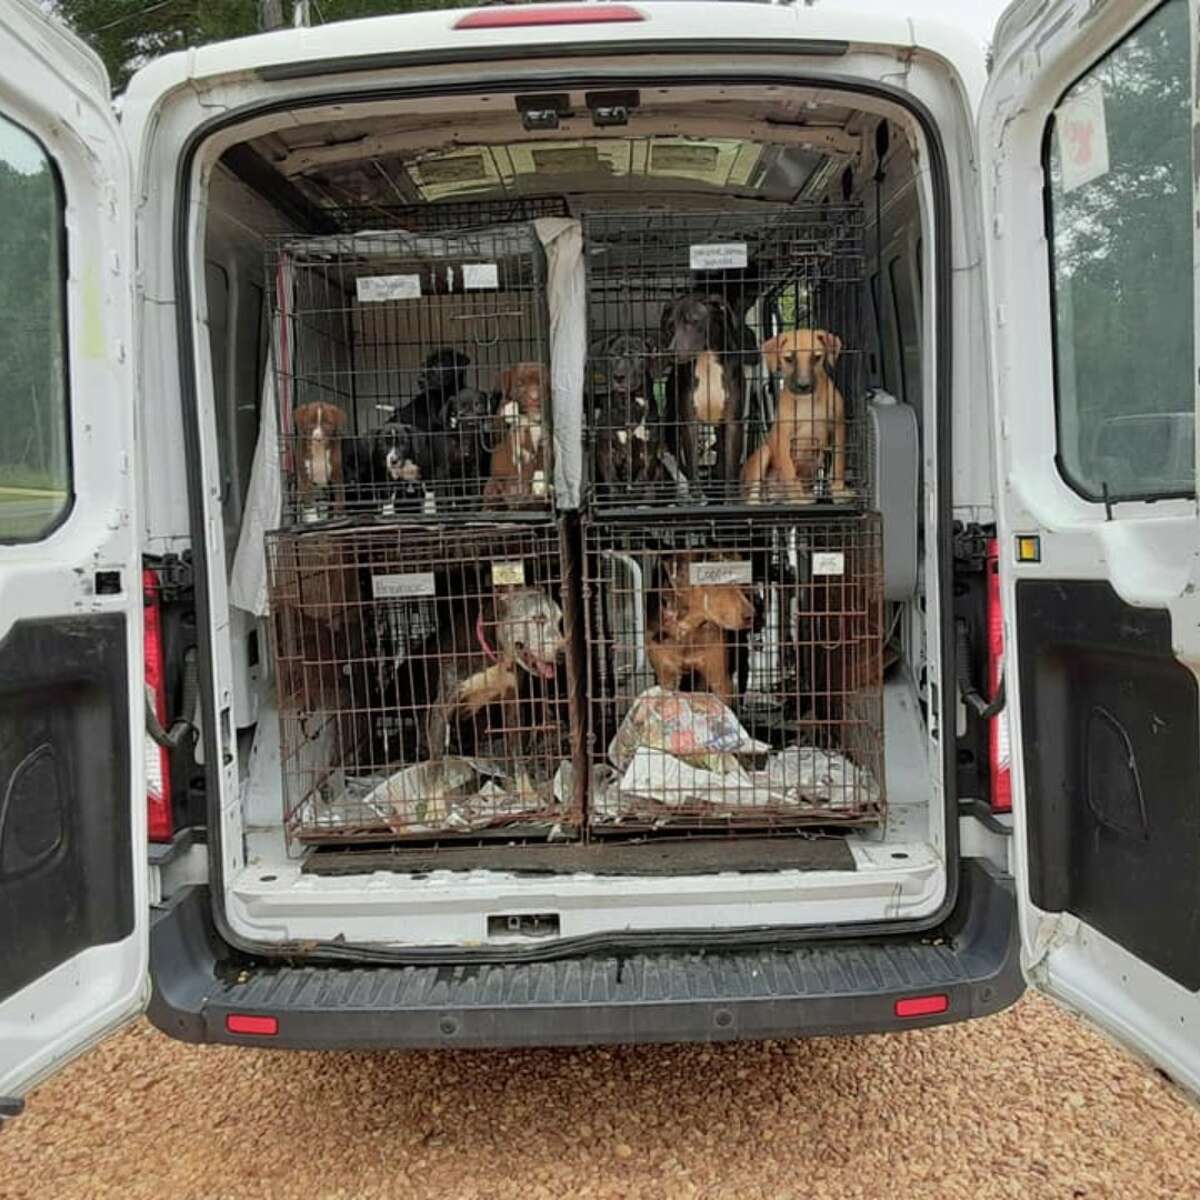 Shelter animals evacuated from Hurricane Ida land in Hudson Valley